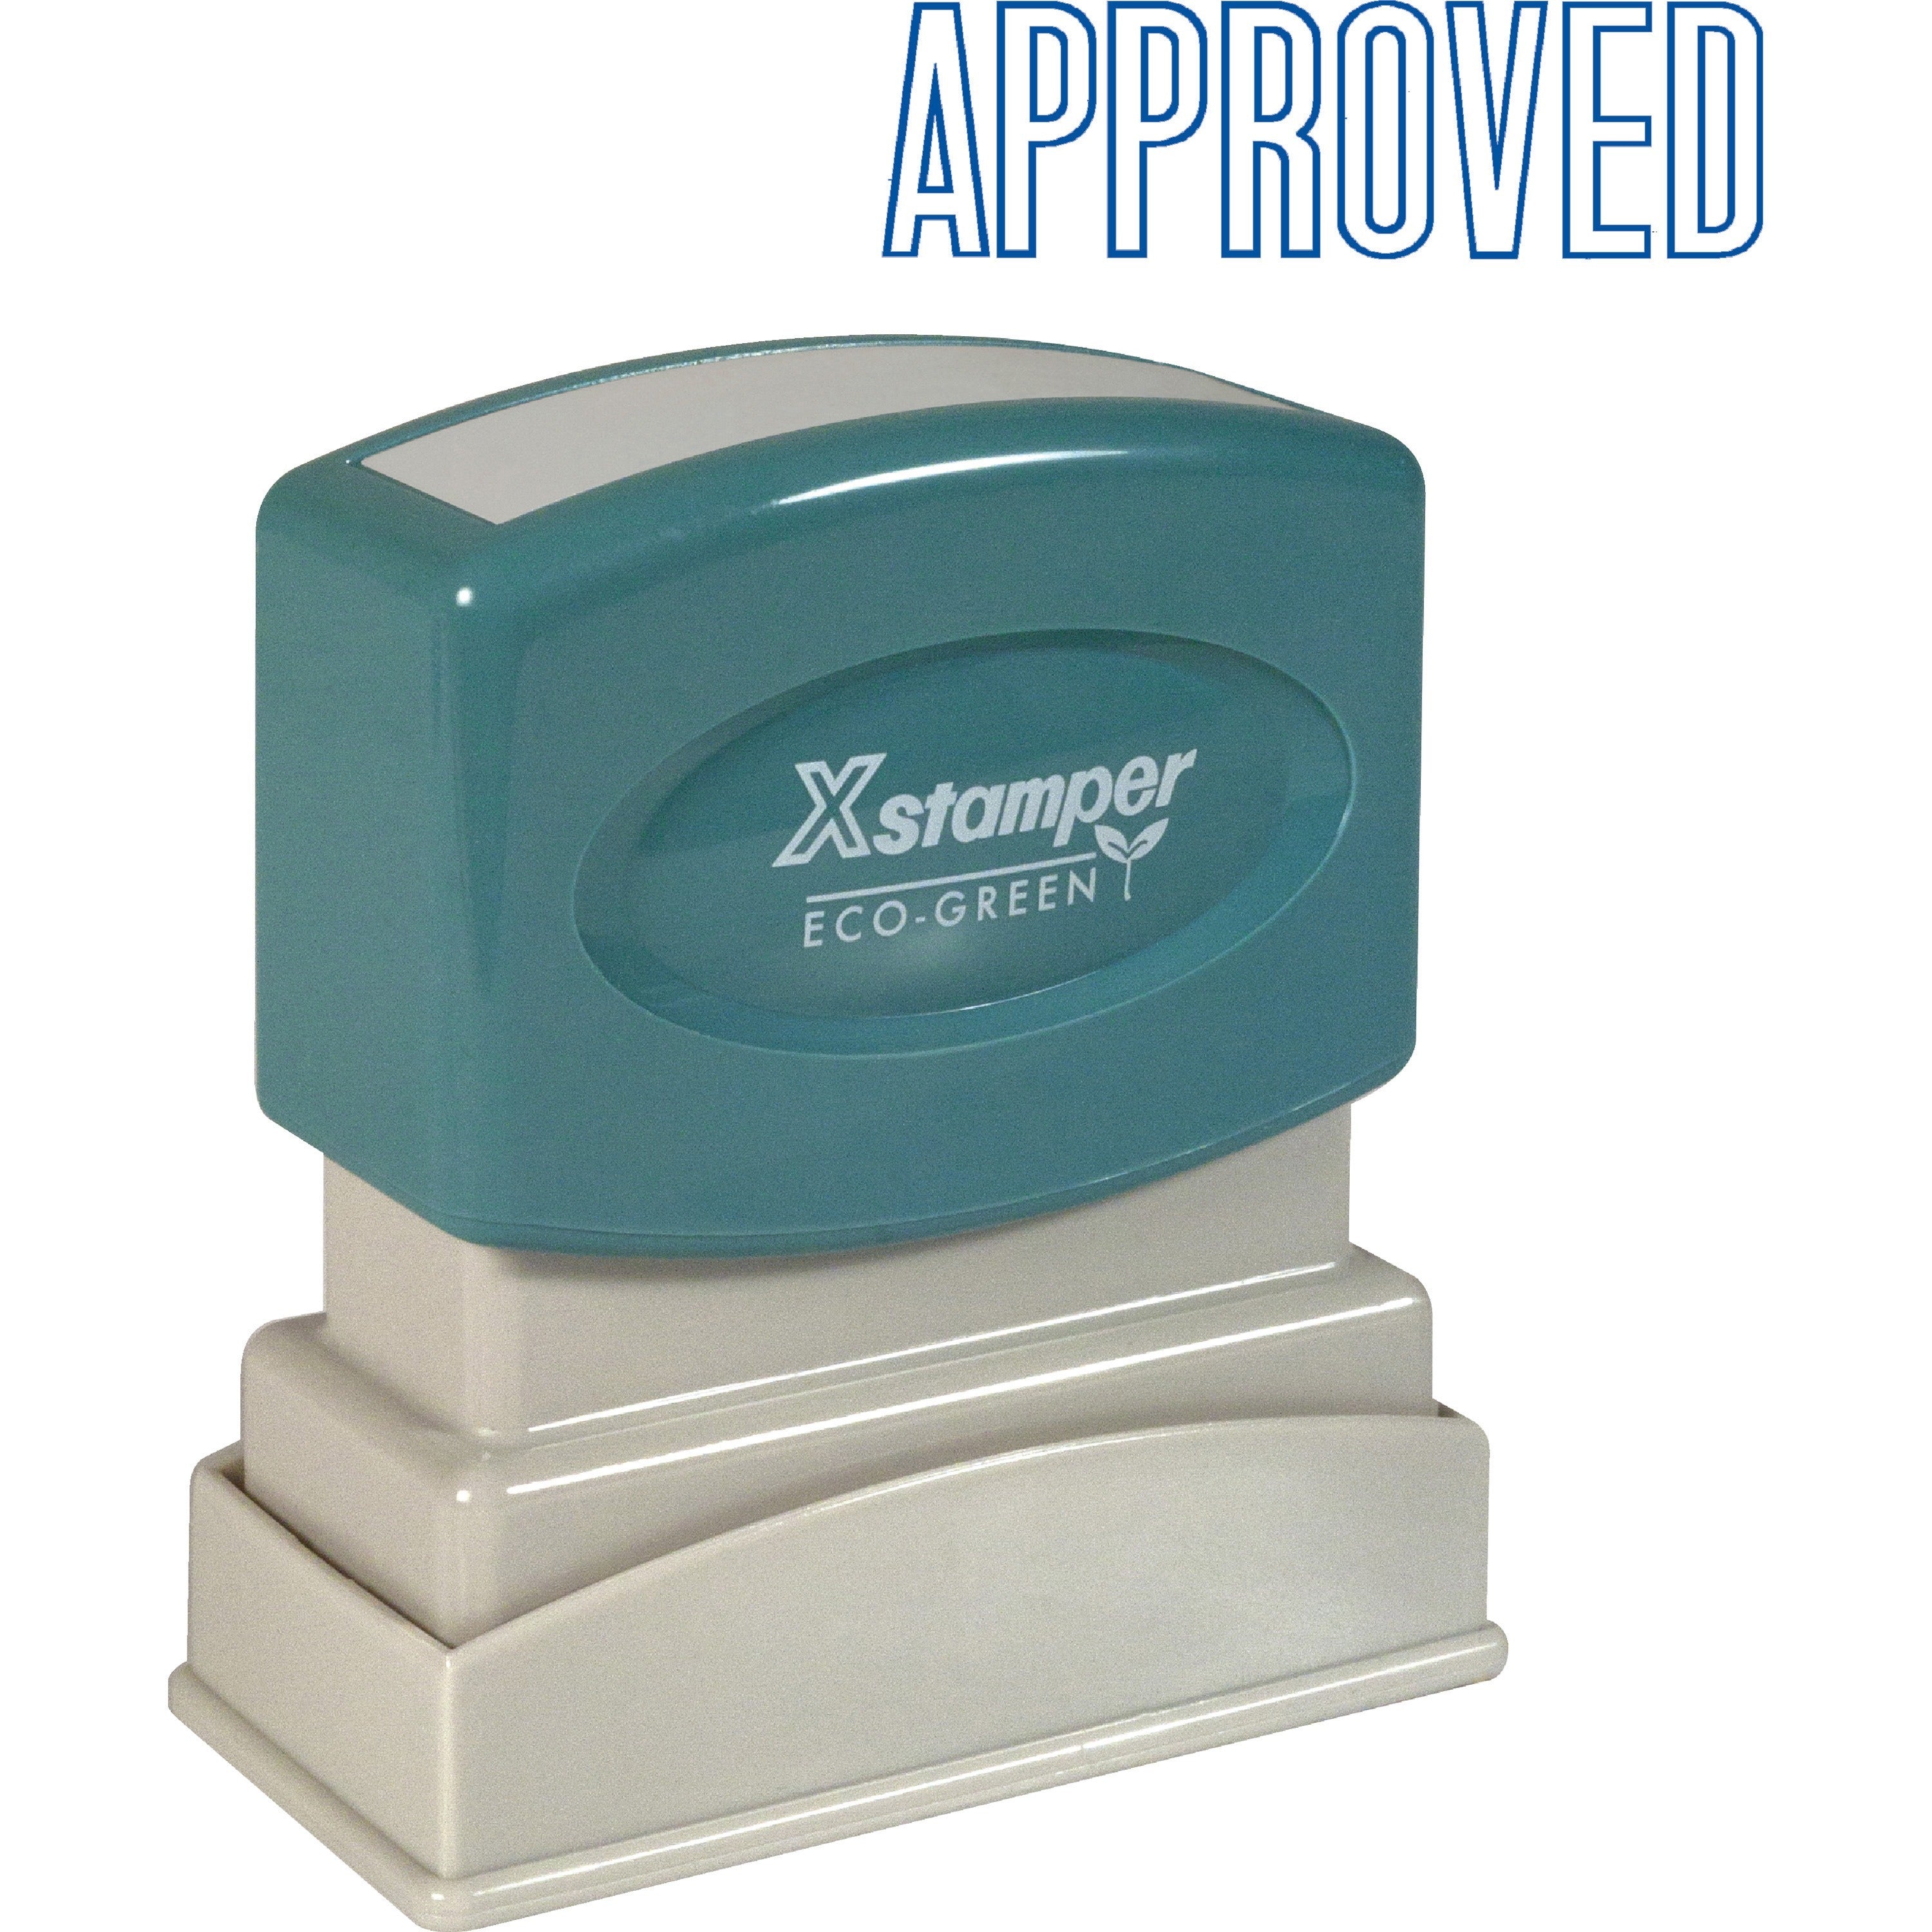 Xstamper APPROVED Title Stamp - Message Stamp - "APPROVED" - 0.50" Impression Width x 1.63" Impression Length - 100000 Impression(s) - Blue - Recycled - 1 Each - 